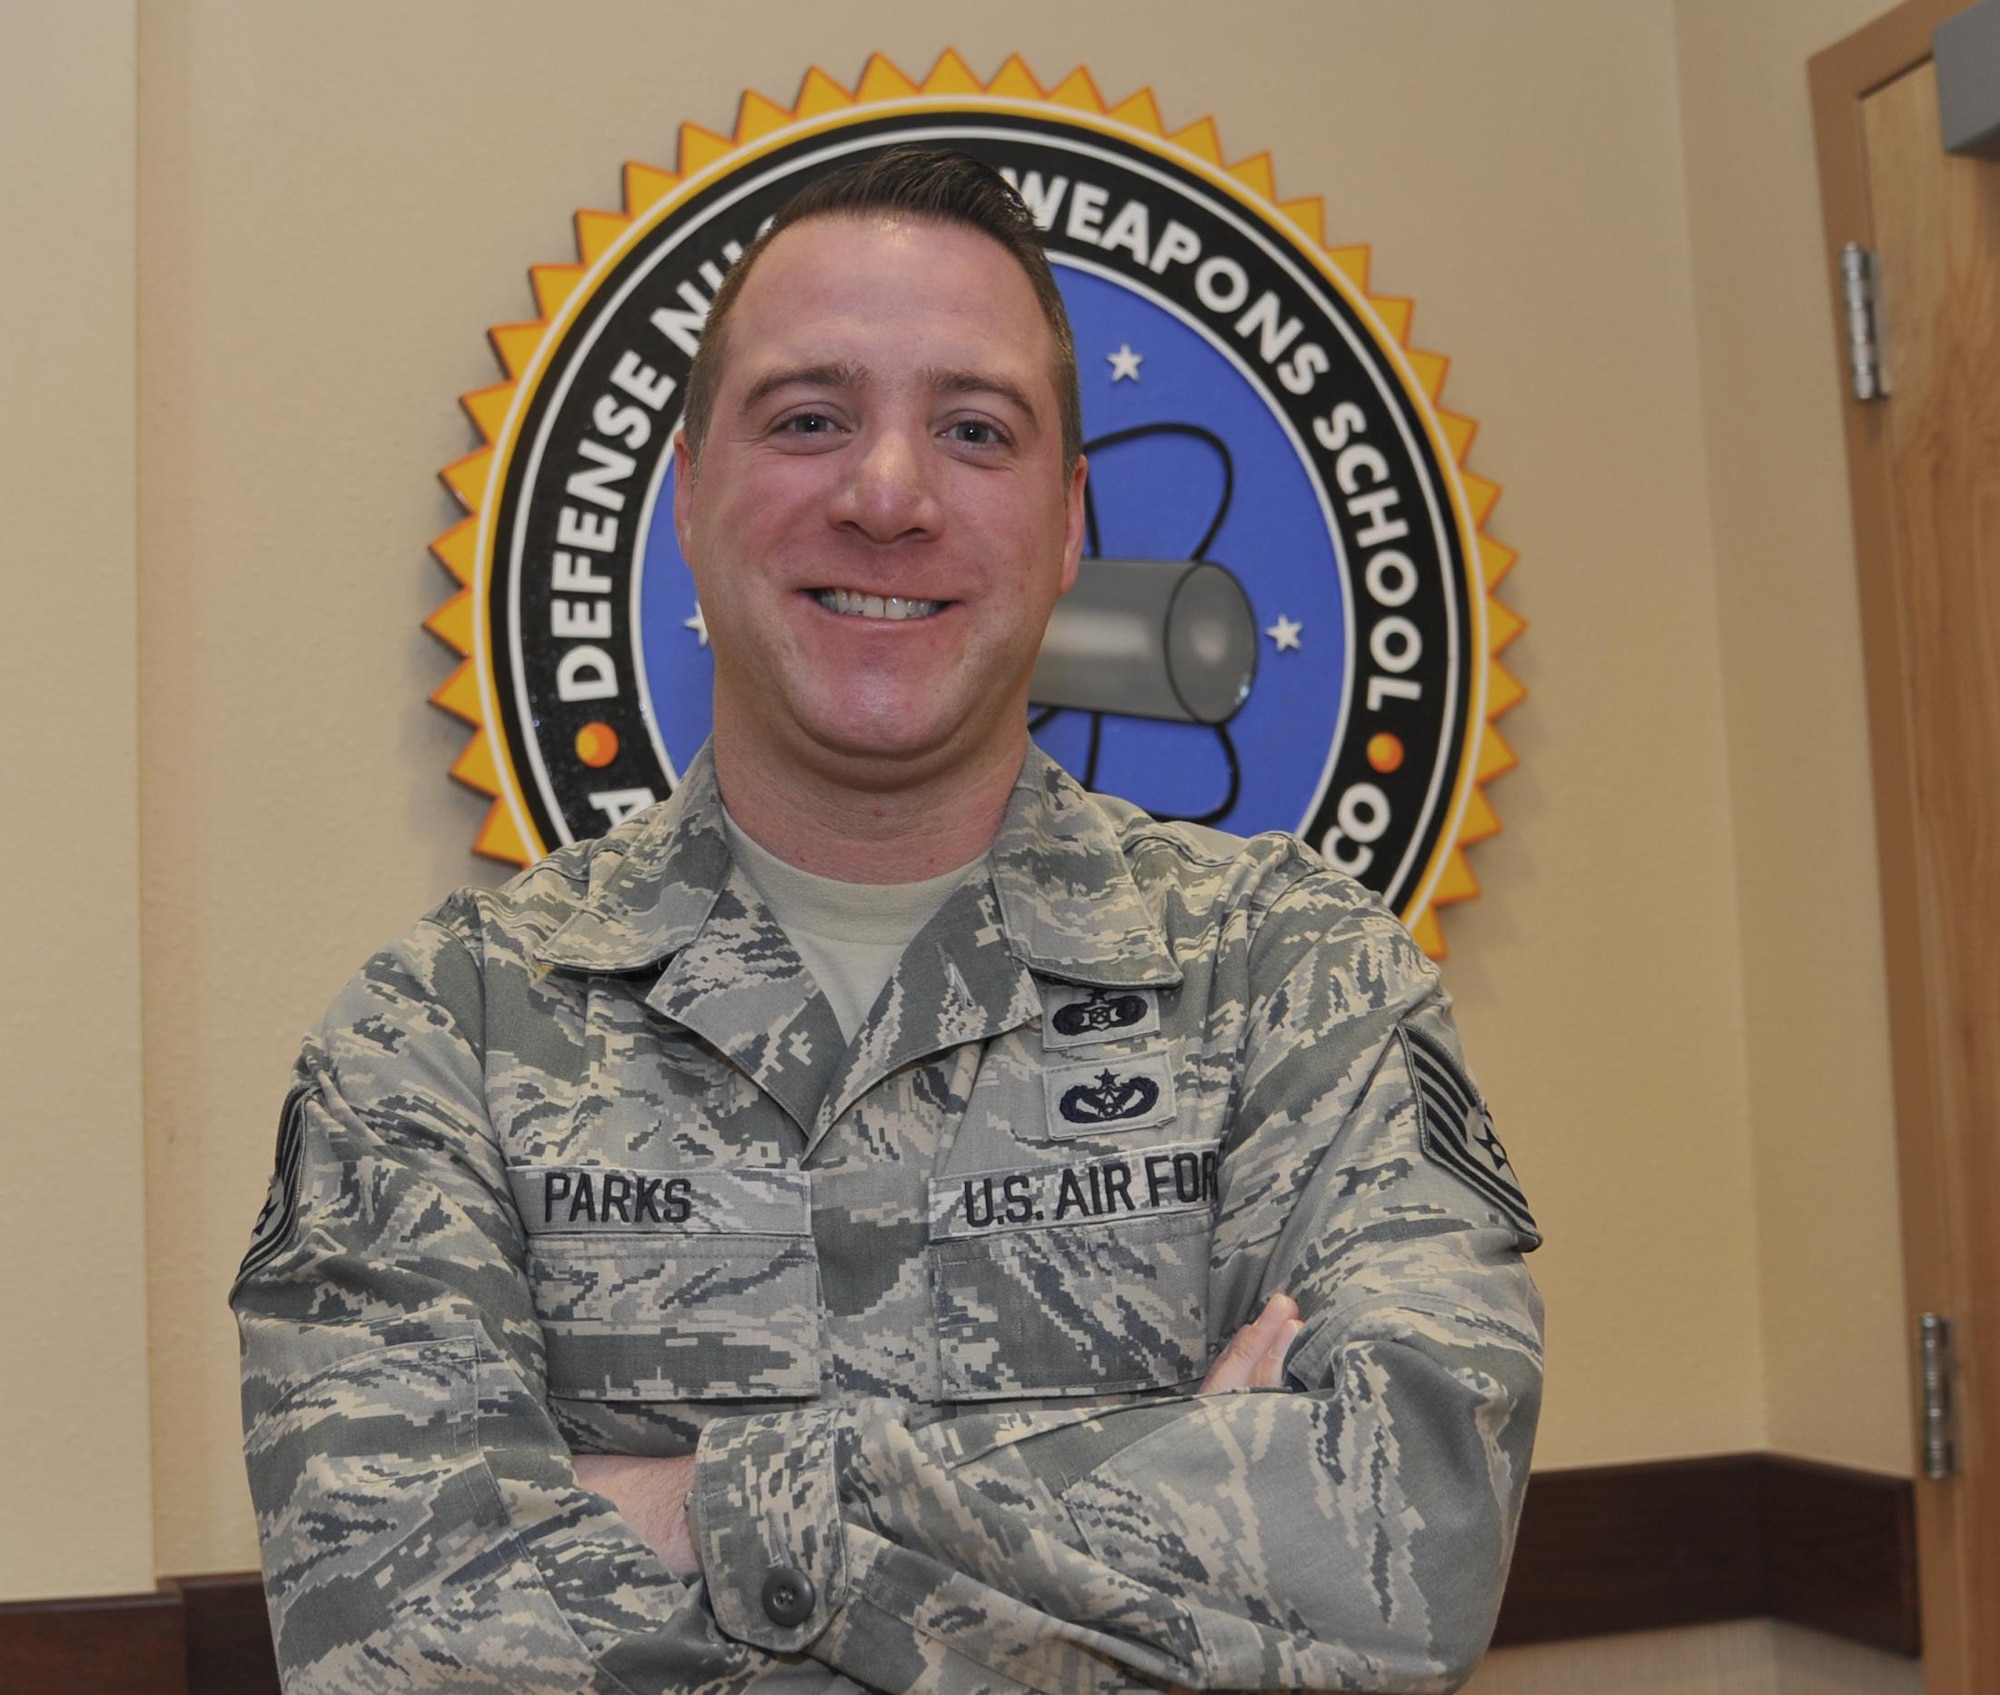 Tech. Sgt. Jeremy Parks, Defense Nuclear Weapons School, was selected as Kirtland Warrior for his contributions to the nuclear mission. 